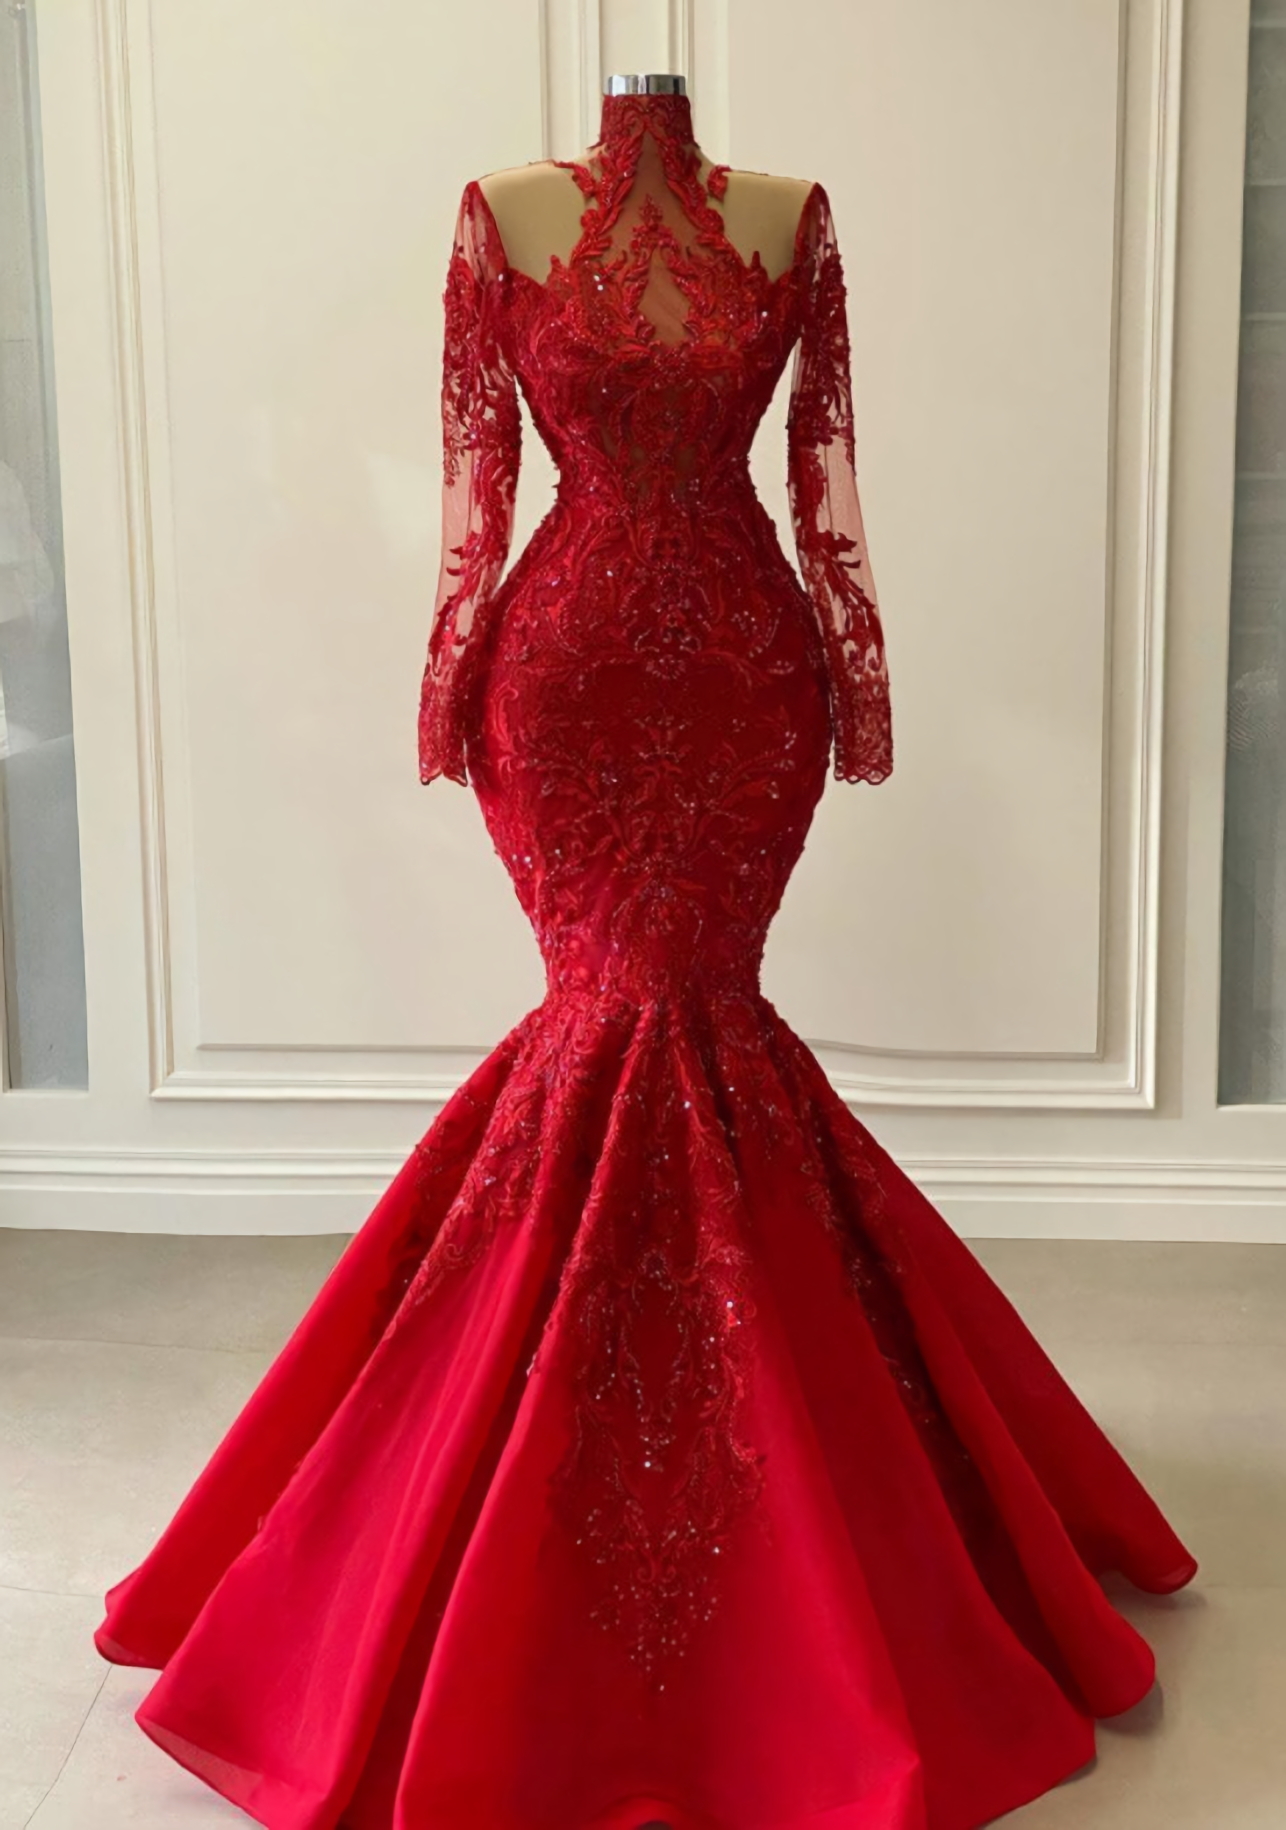 Arabic Aso Ebi Red Luxurious Lace Beaded Evening Dresses, Mermaid Long Sleeves Corset Prom Dresses, Vintage Corset Formal Party Second Reception Gowns outfits, Mafia Dress